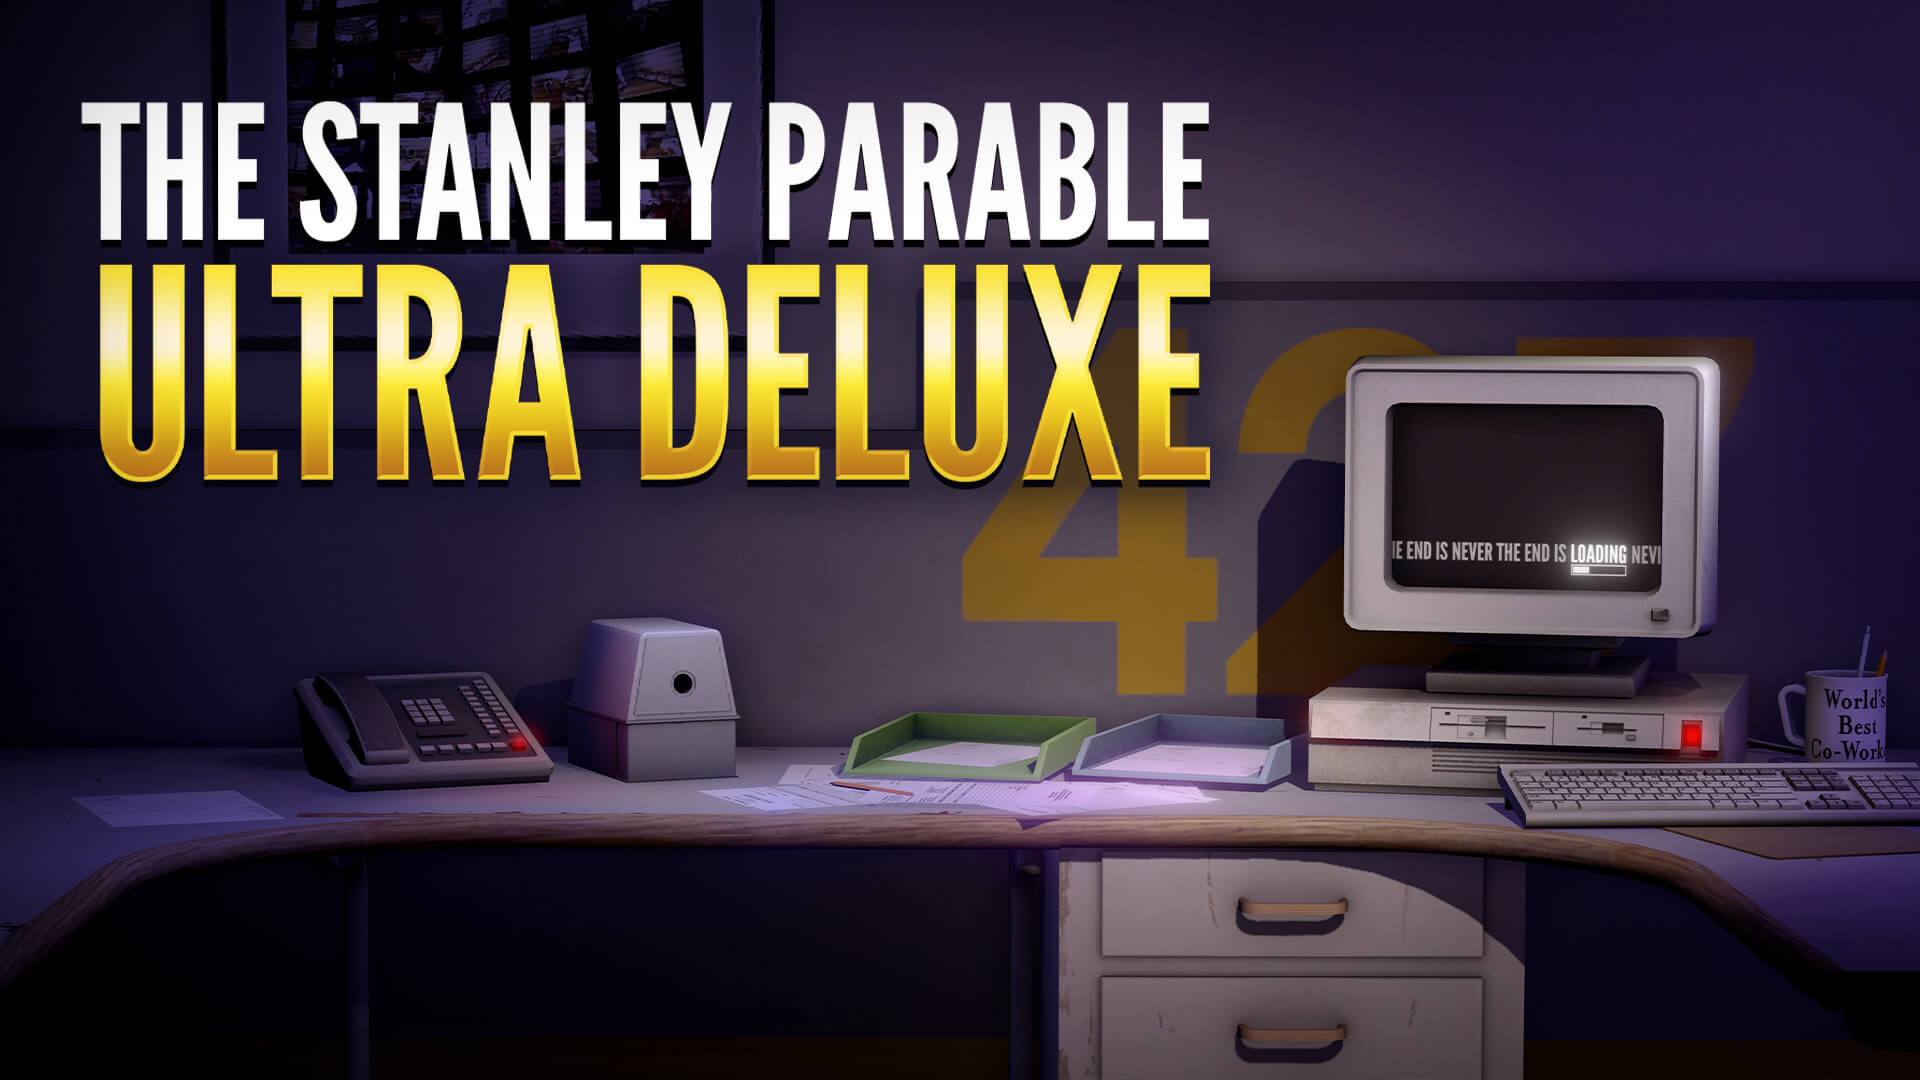 The Stanley Parable Ultra Deluxe: The story splits off in numerous possibilities, based on the player's choices. 1920x1080 Full HD Background.